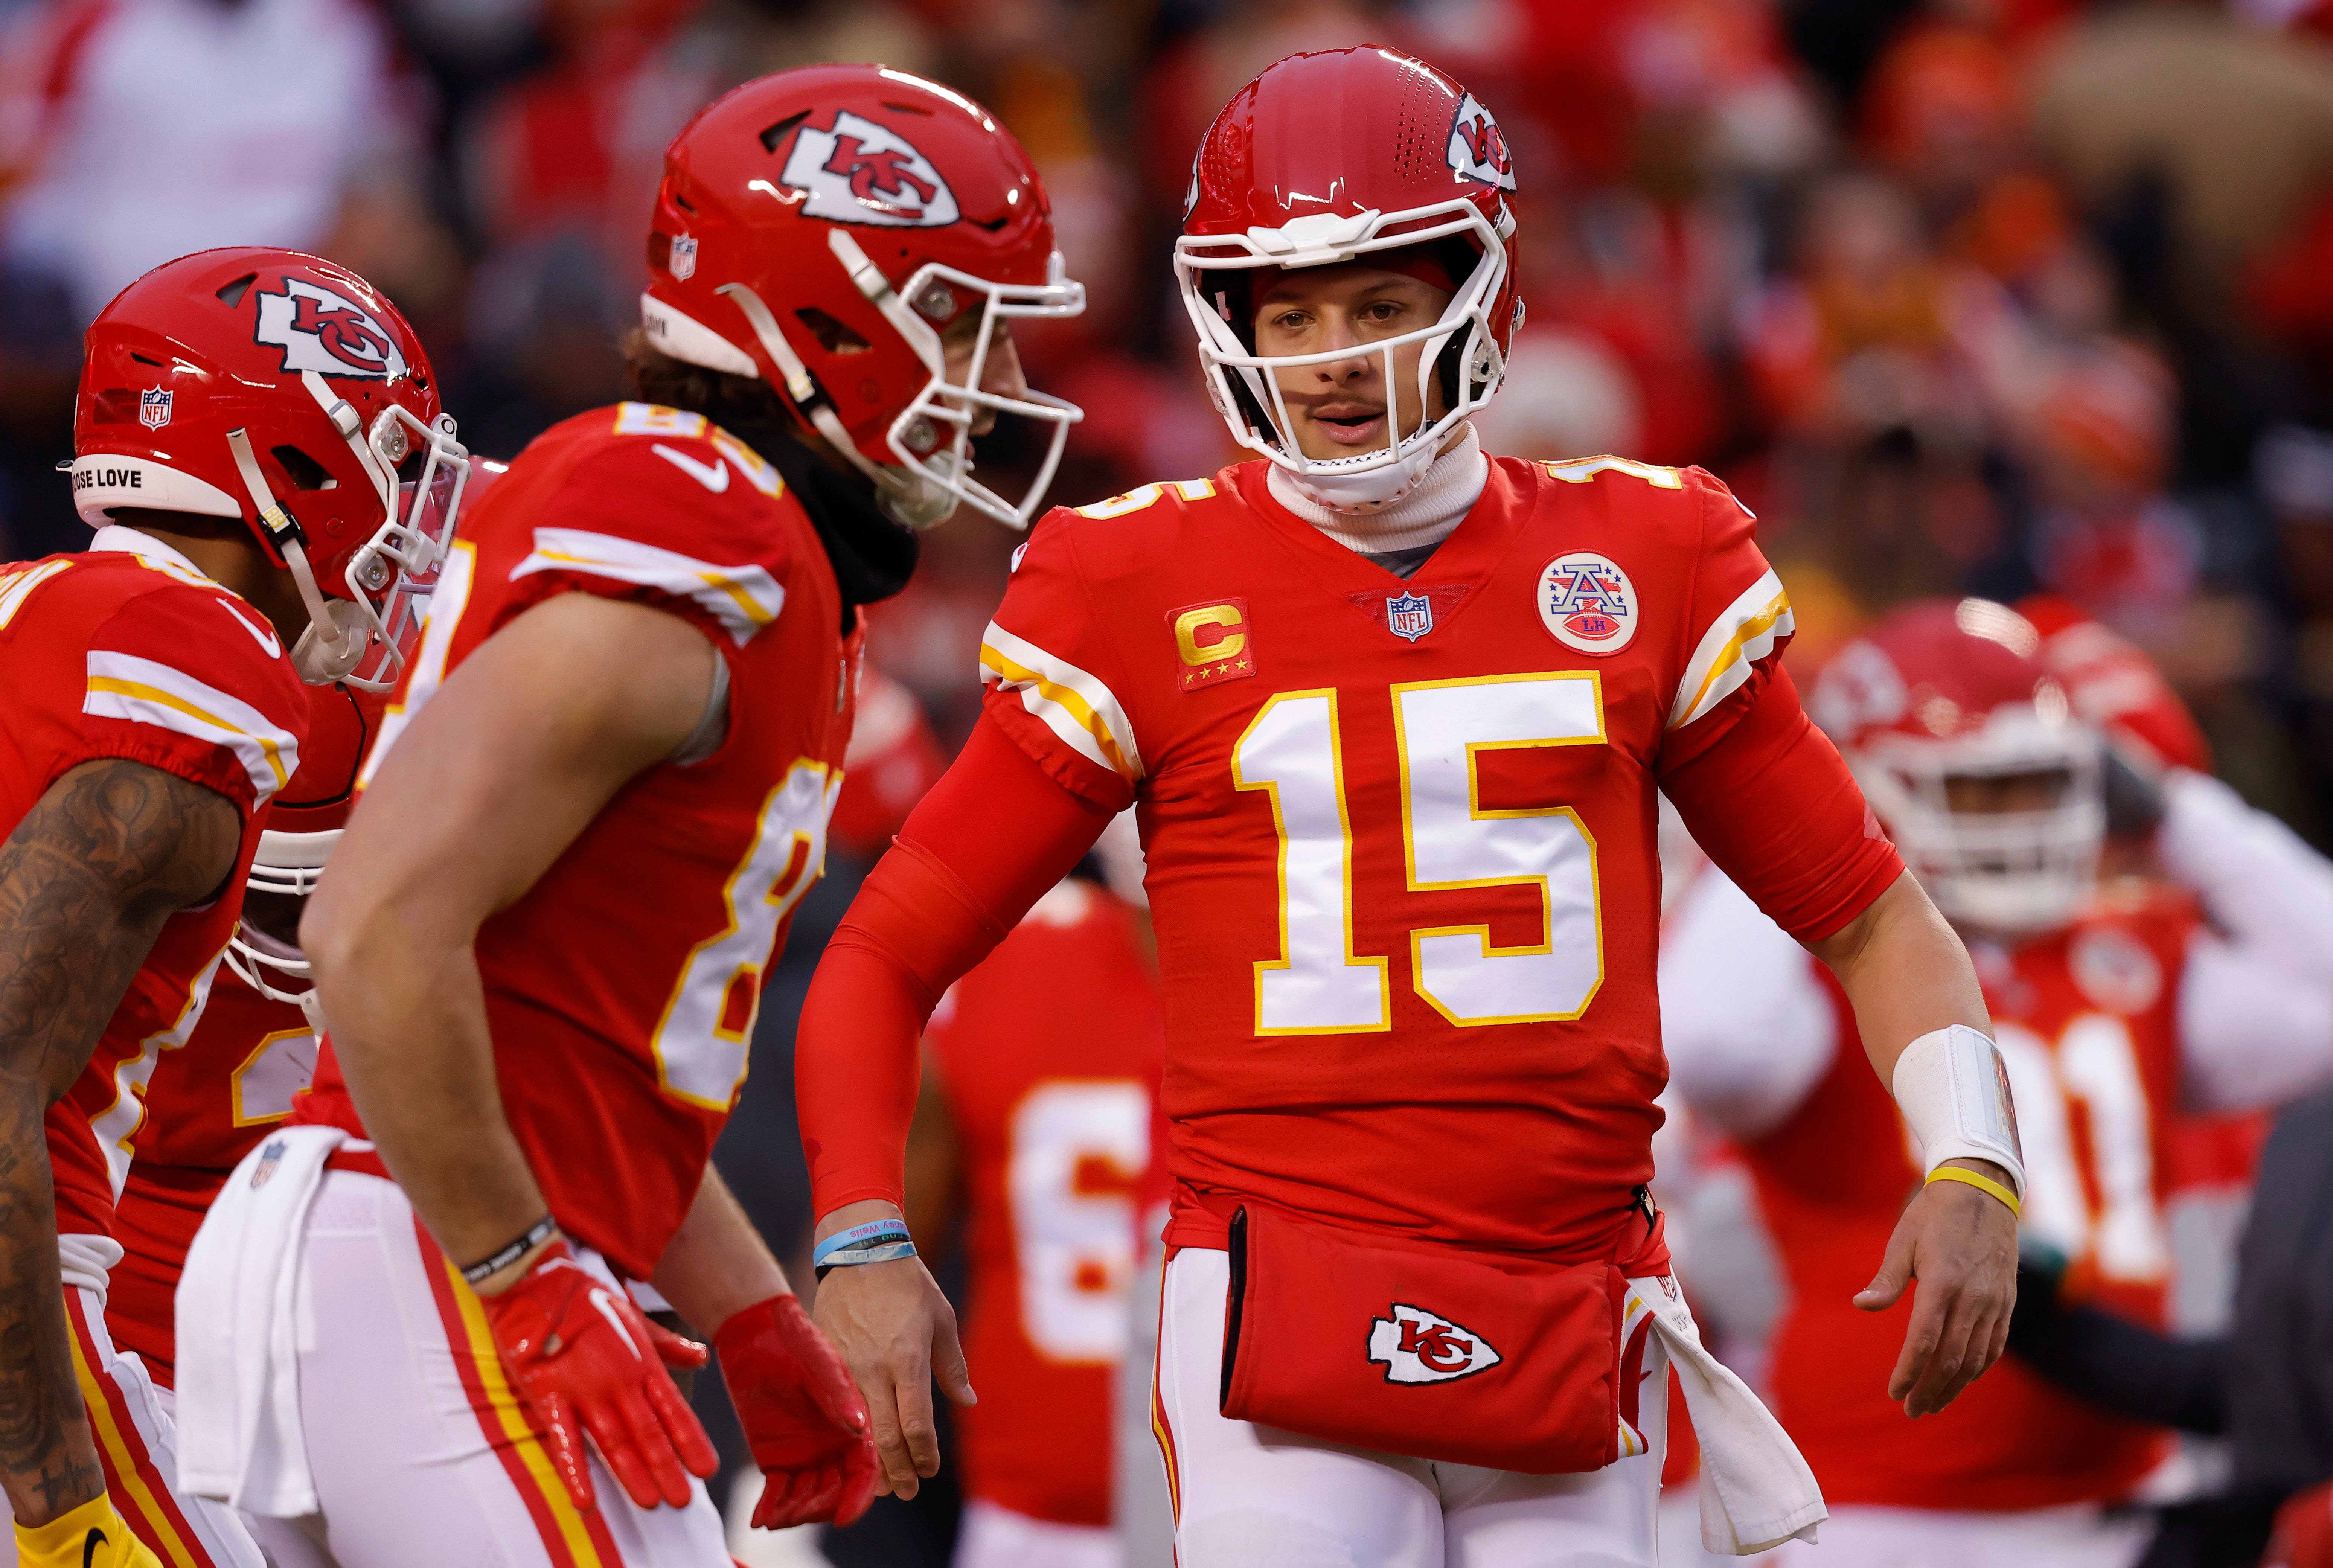 Chiefs vs. Bengals score, analysis: Kansas City takes early lead with FG after losing challenge